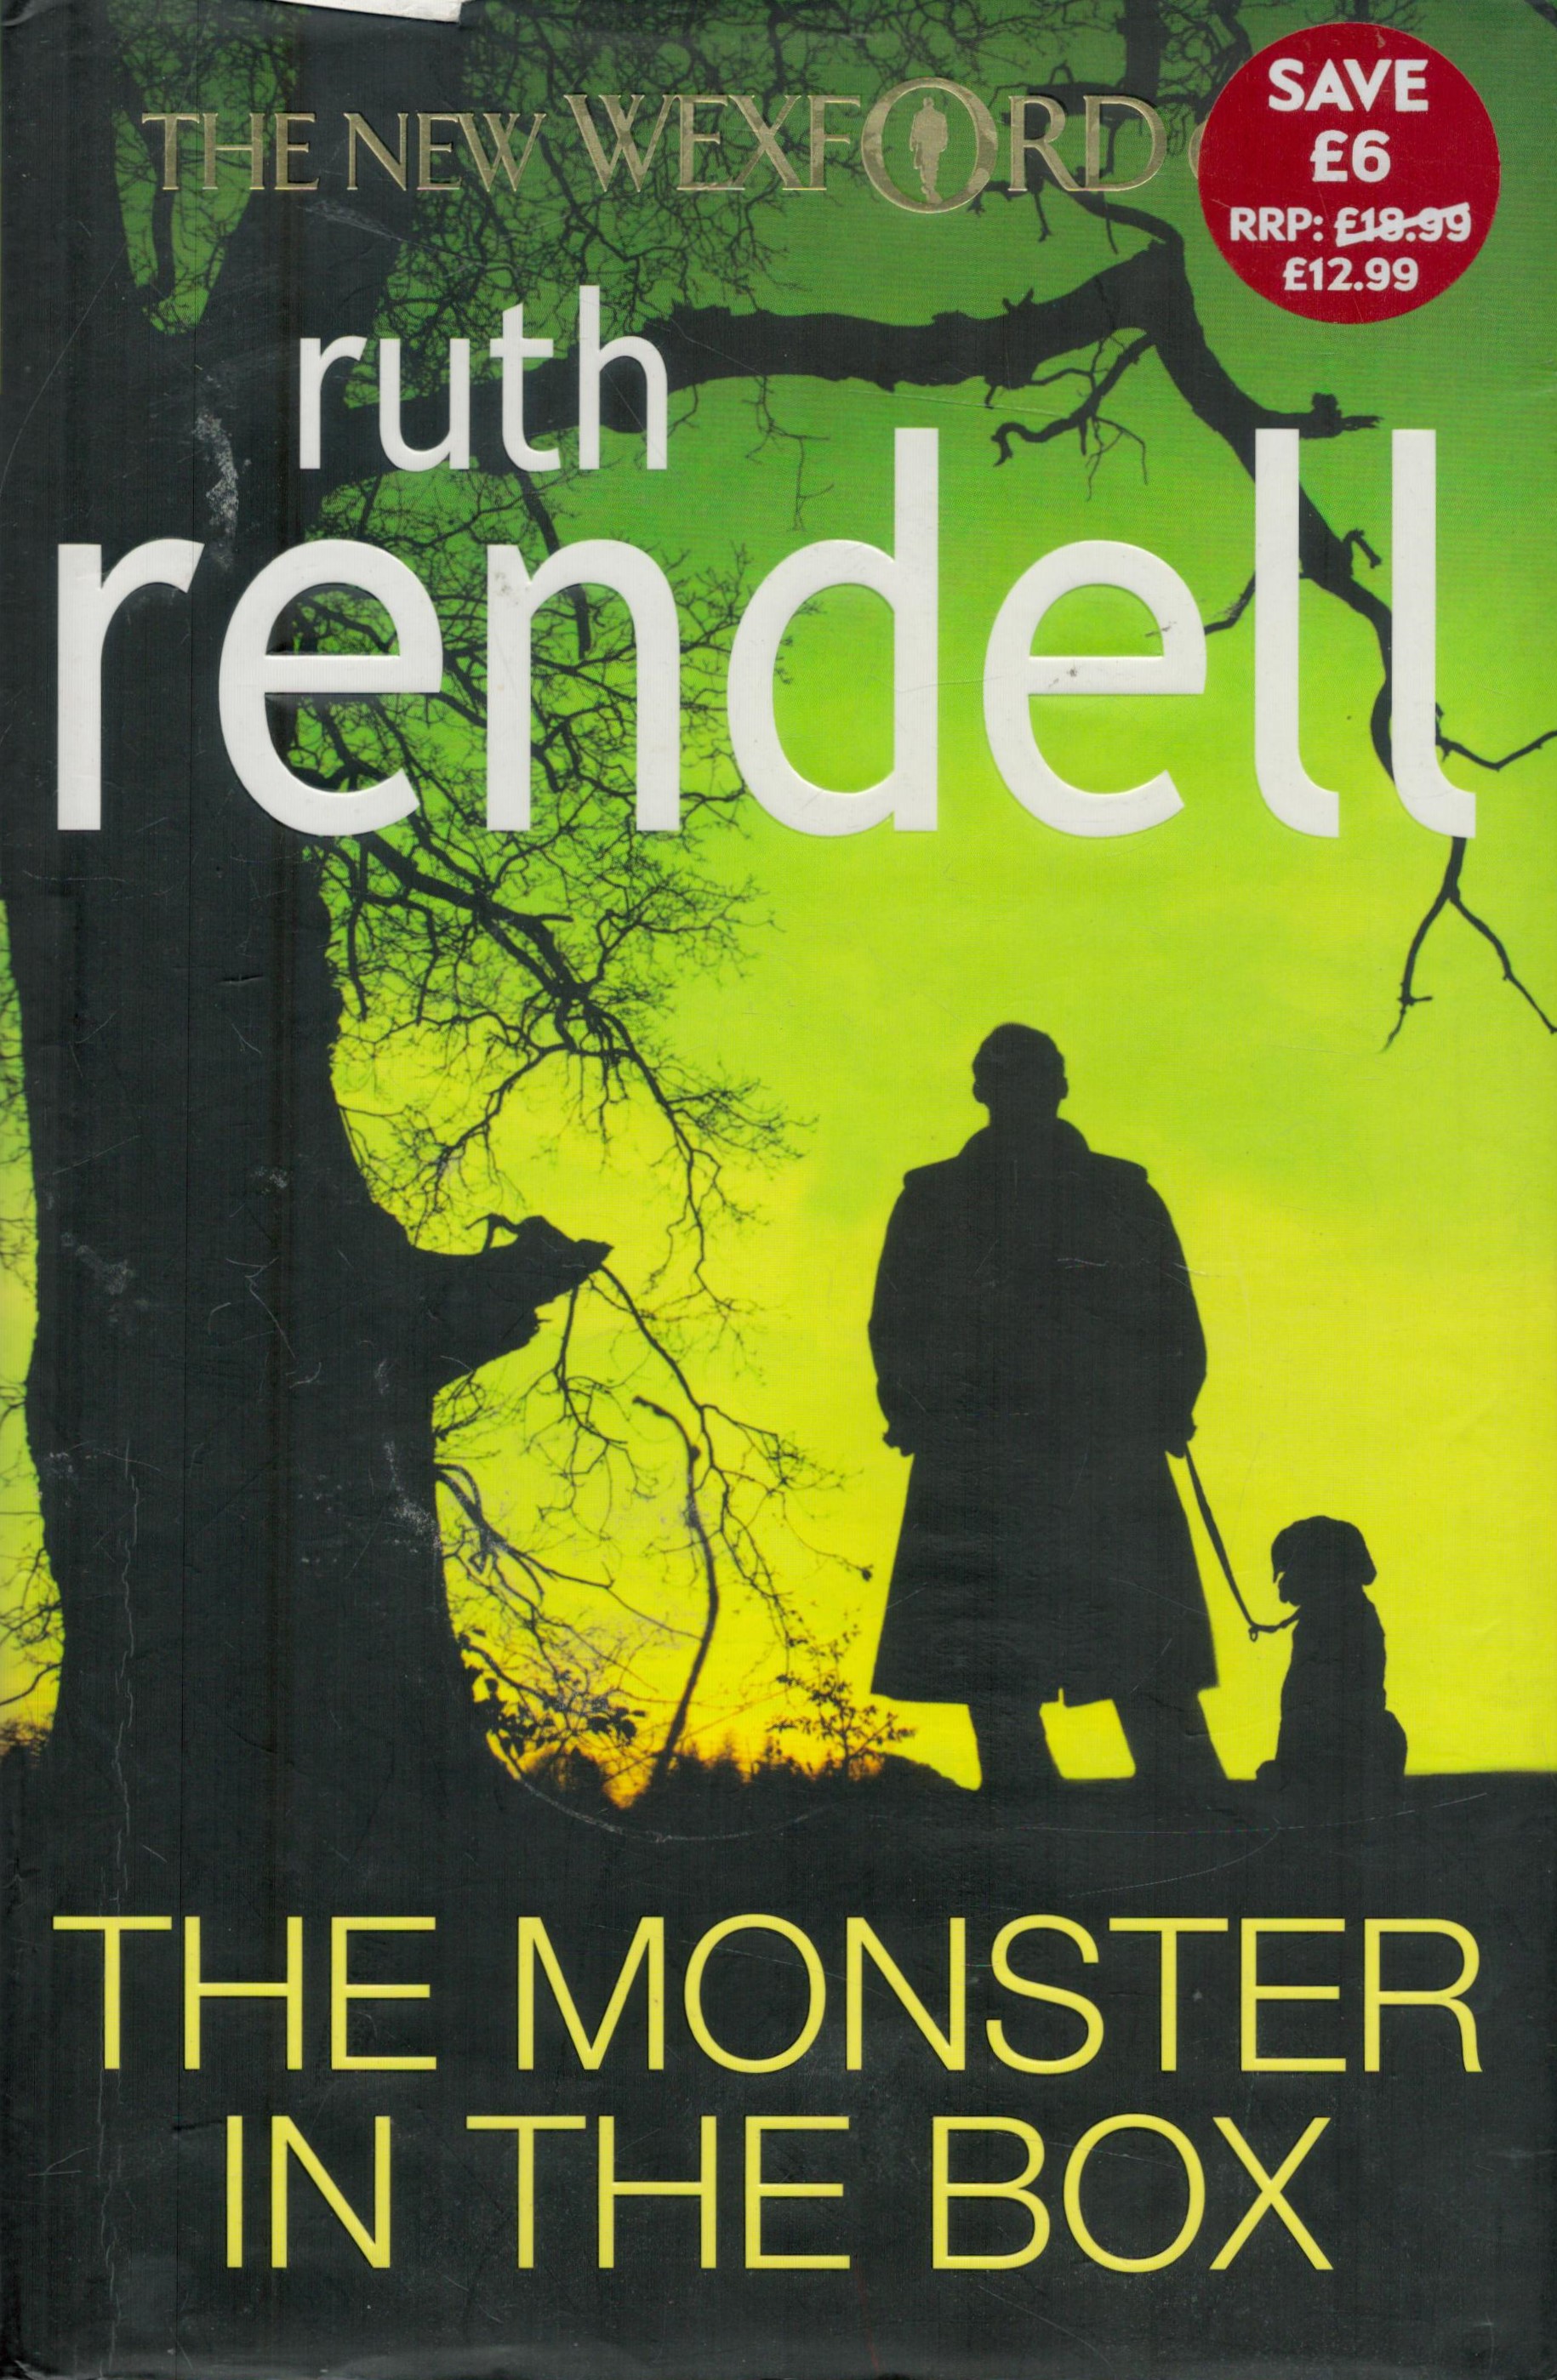 Ruth Rendall 1st Edition Hardback Book Titled The Monster In The Box. Spine and Dust jacket in